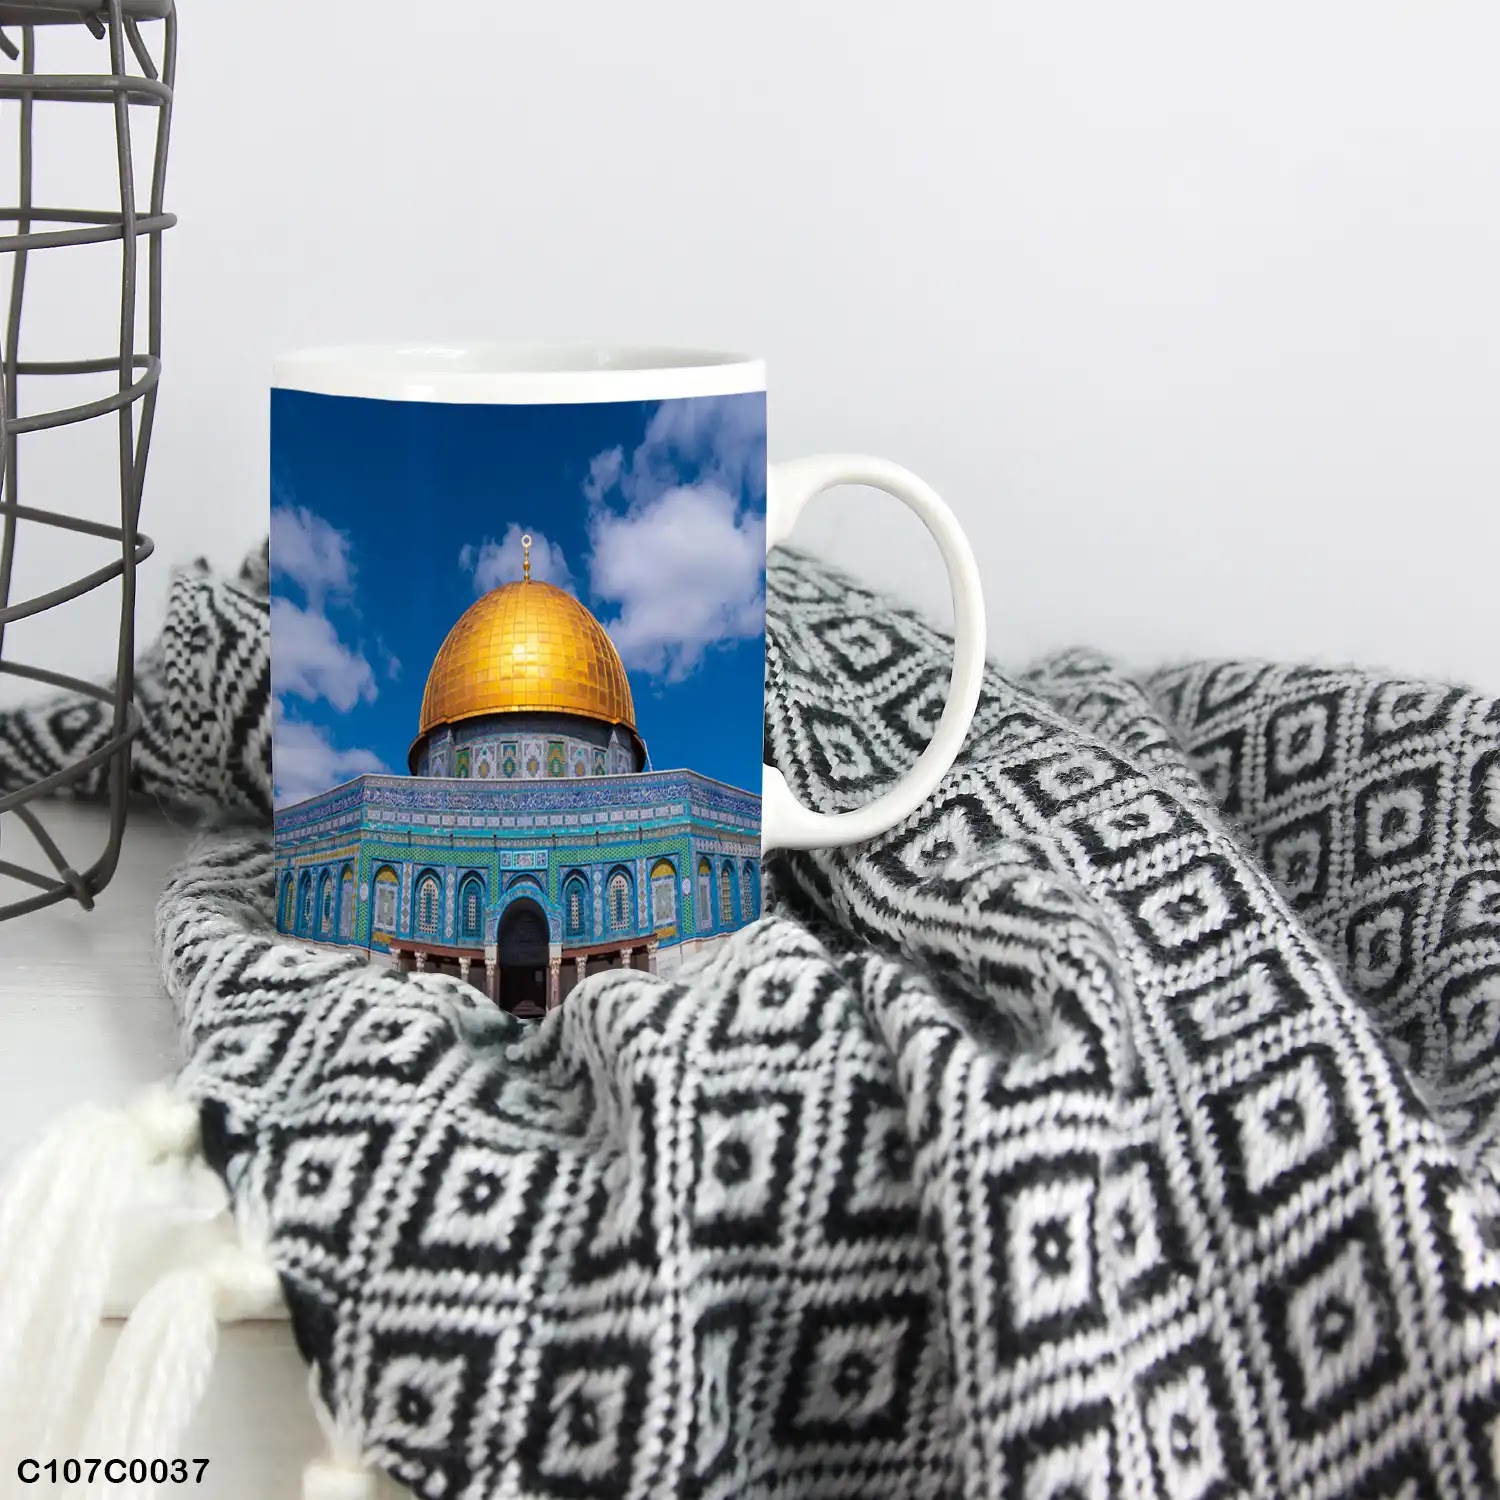 A mug (cup) printed with an image of Dome of the Rock Mosque